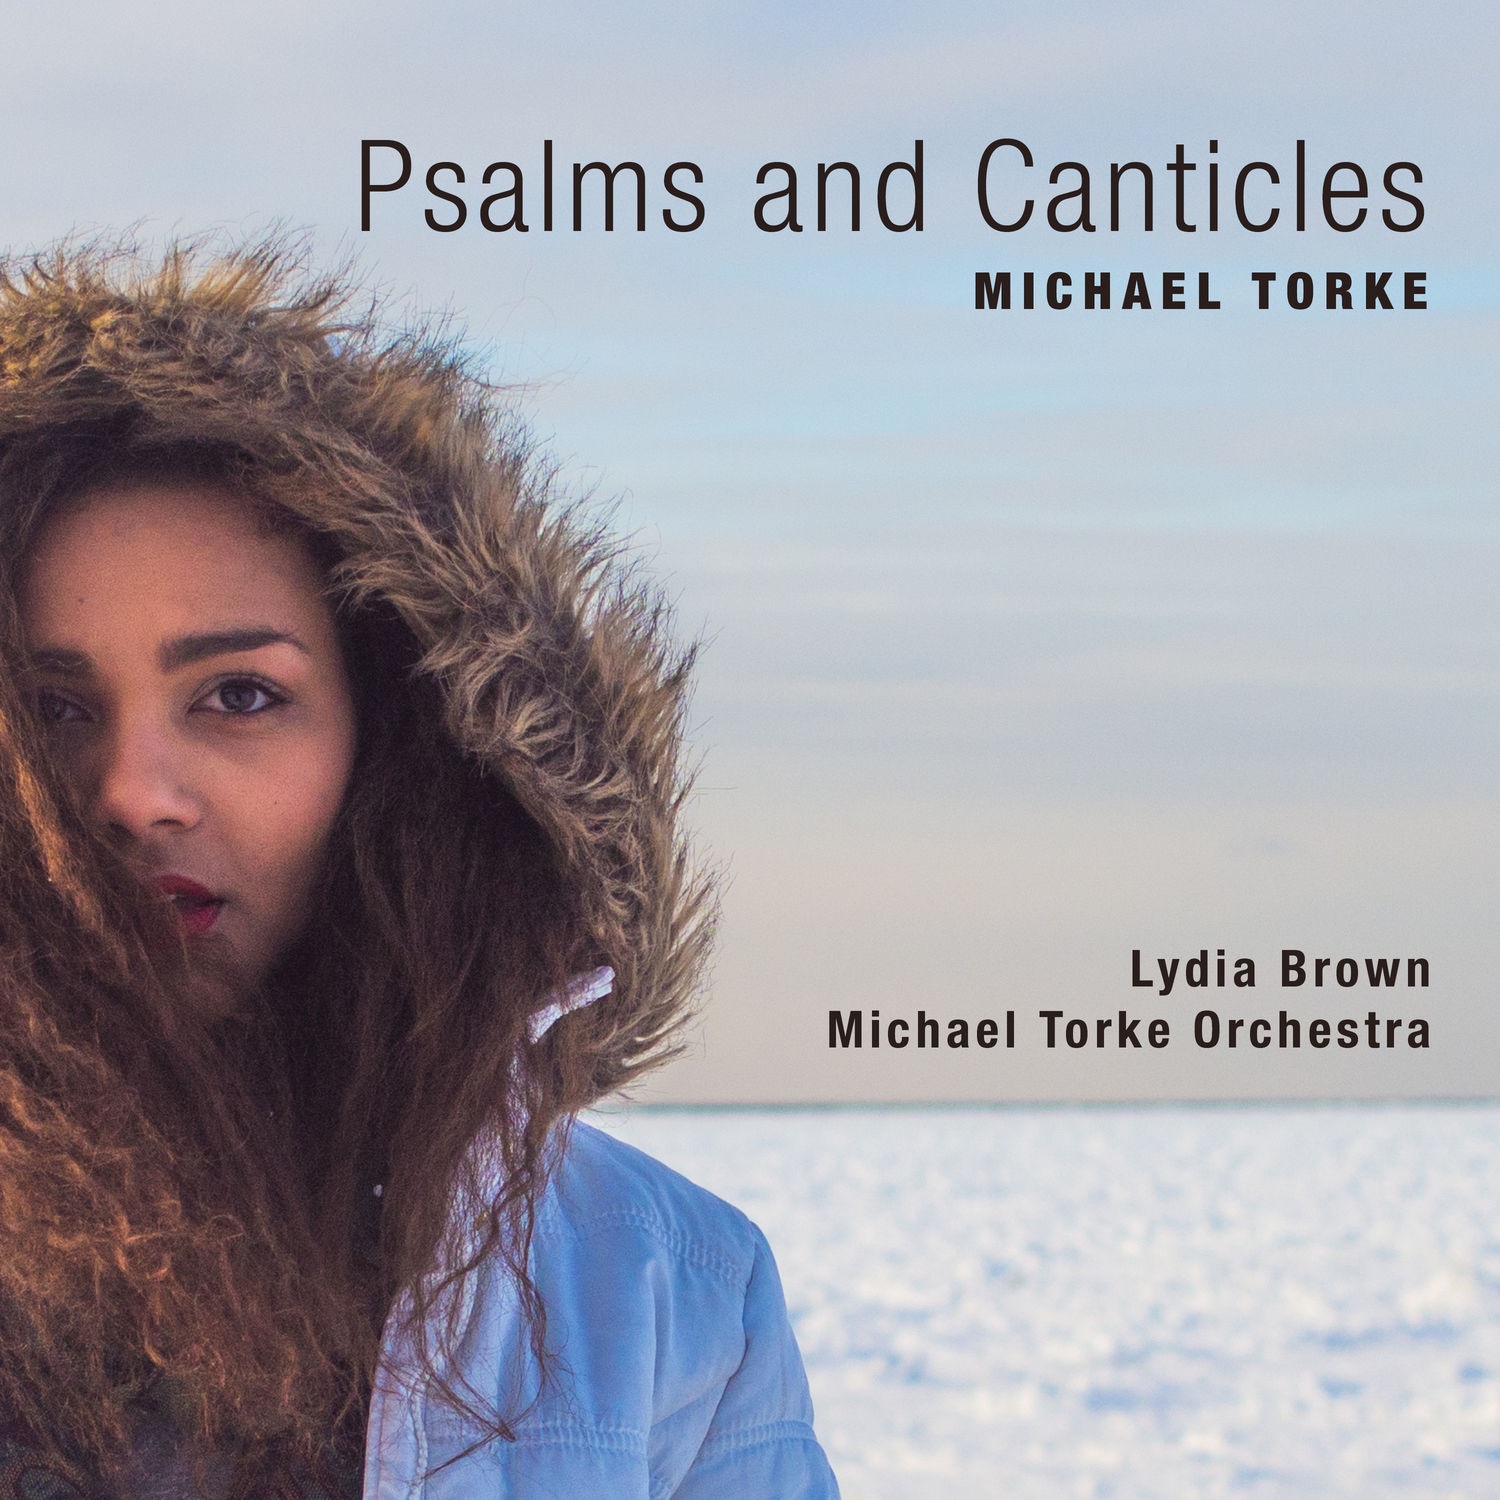 Lydia Brown & Michael Torke Orchestra – Psalms and Canticles (2021) [FLAC 24bit/44,1kHz]